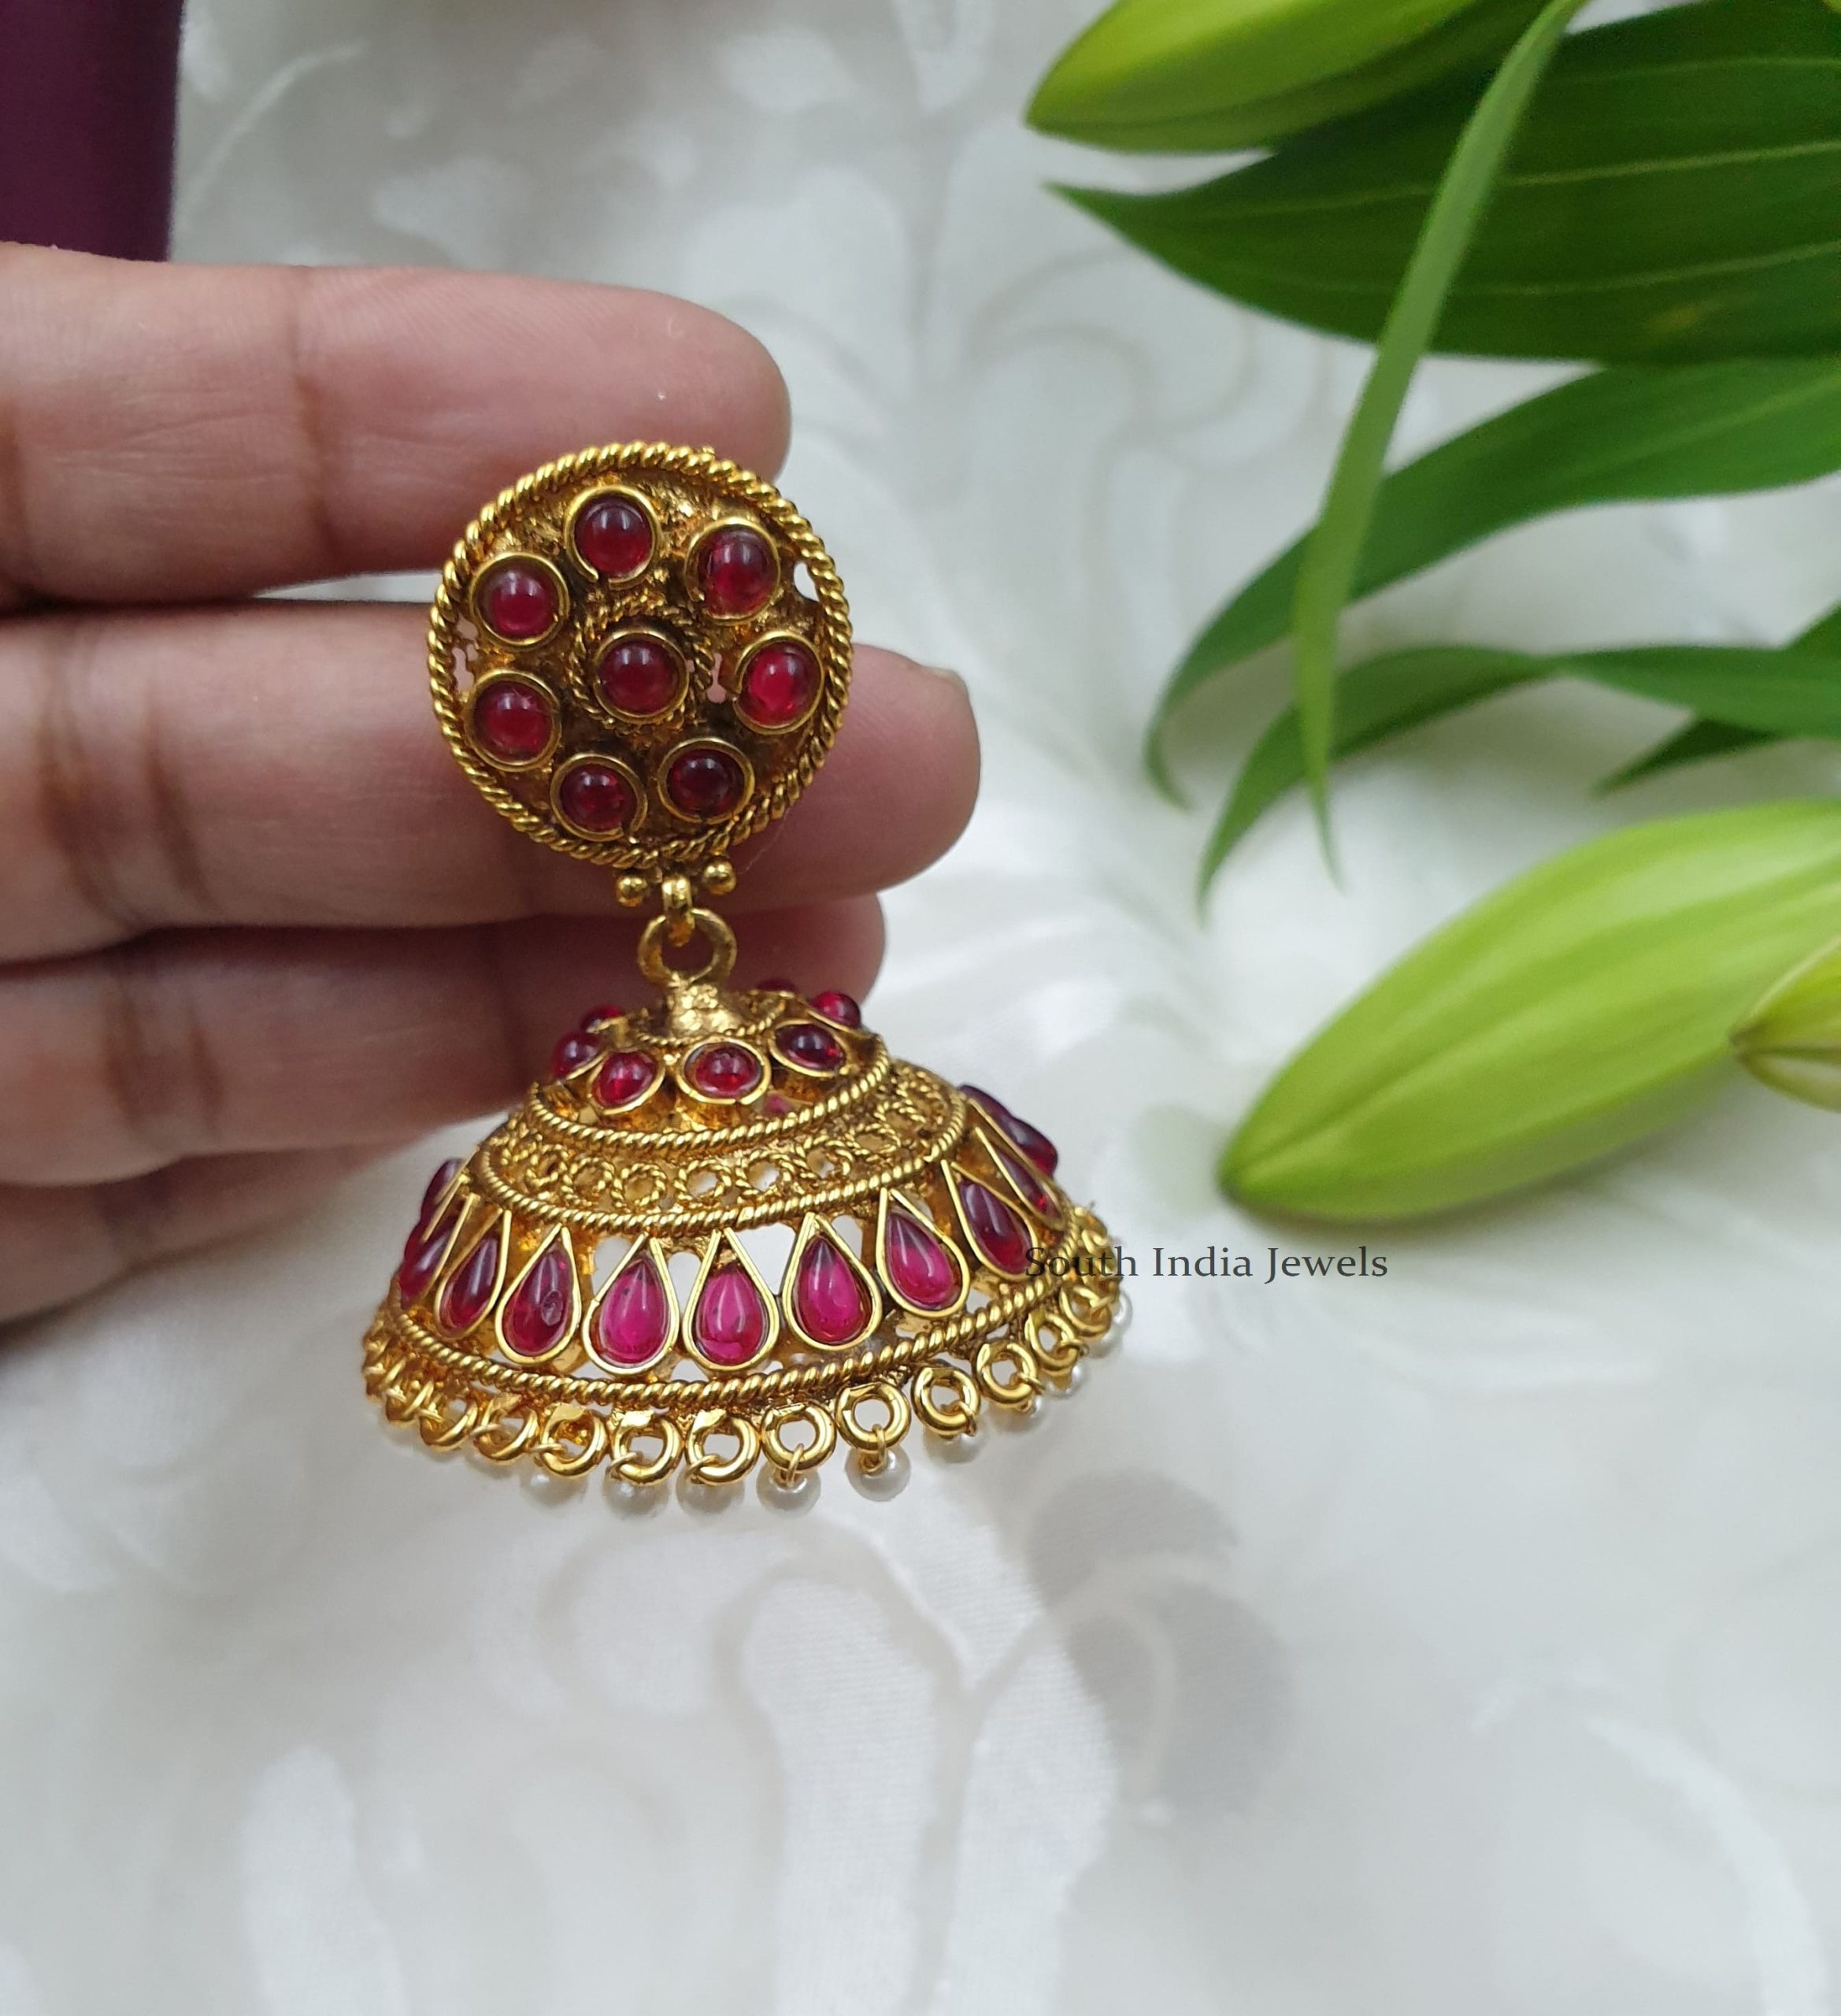 Indian Jewellery Shop Near Me-South India Jewels